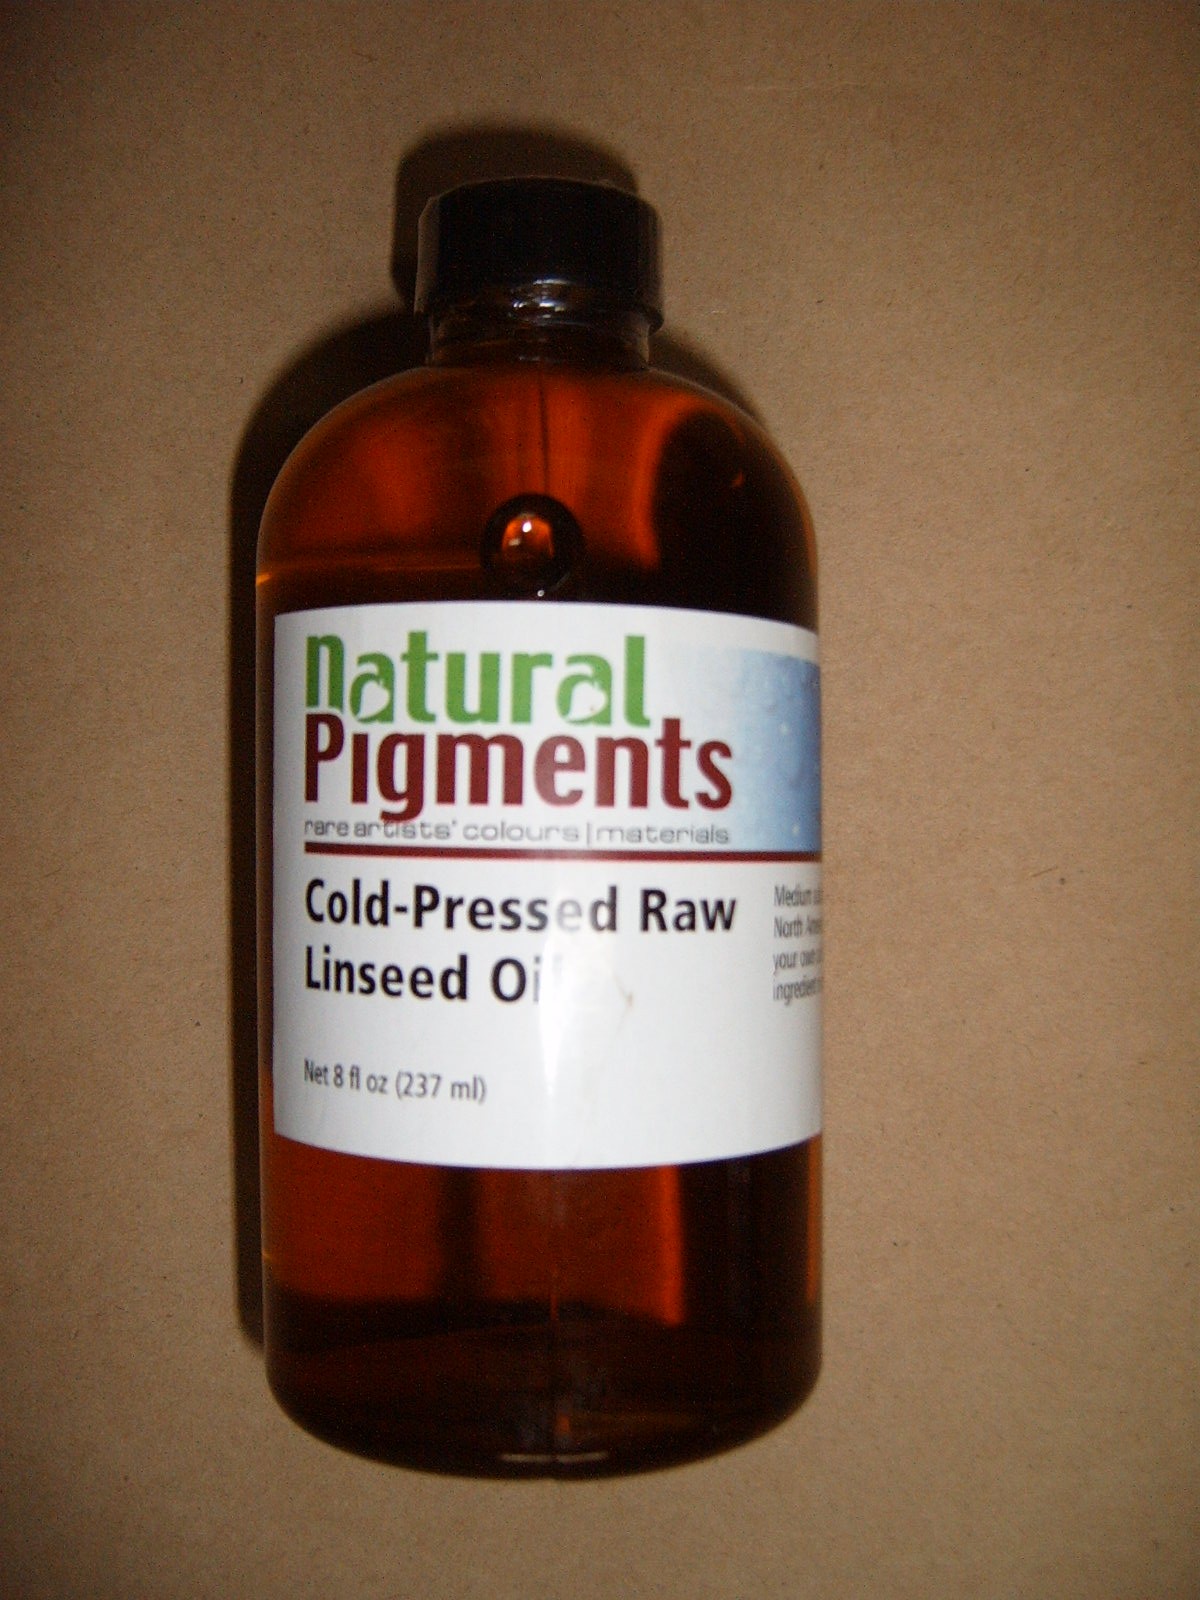 Natural Pigments Cold-Pressed Linseed Oil